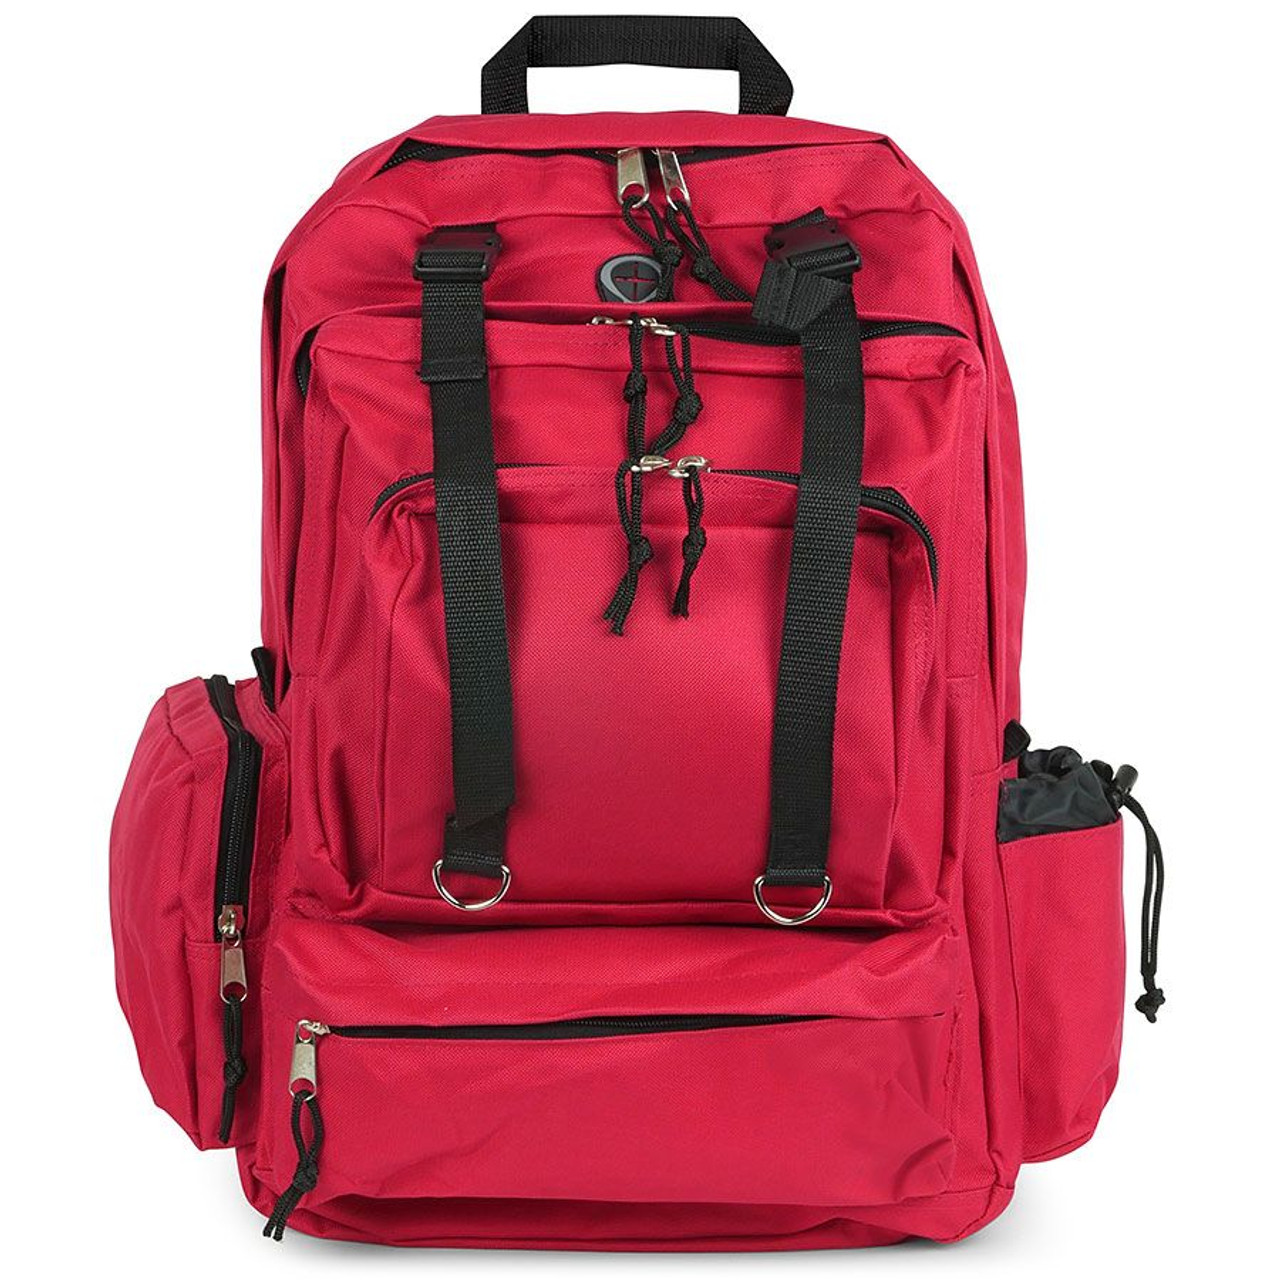 Bags, Backpack First - Reponder Medical Emergency Response EMT Red Kit - Containers Backpacks - Nylon Deluxe Bag Gear and - Aid Survival